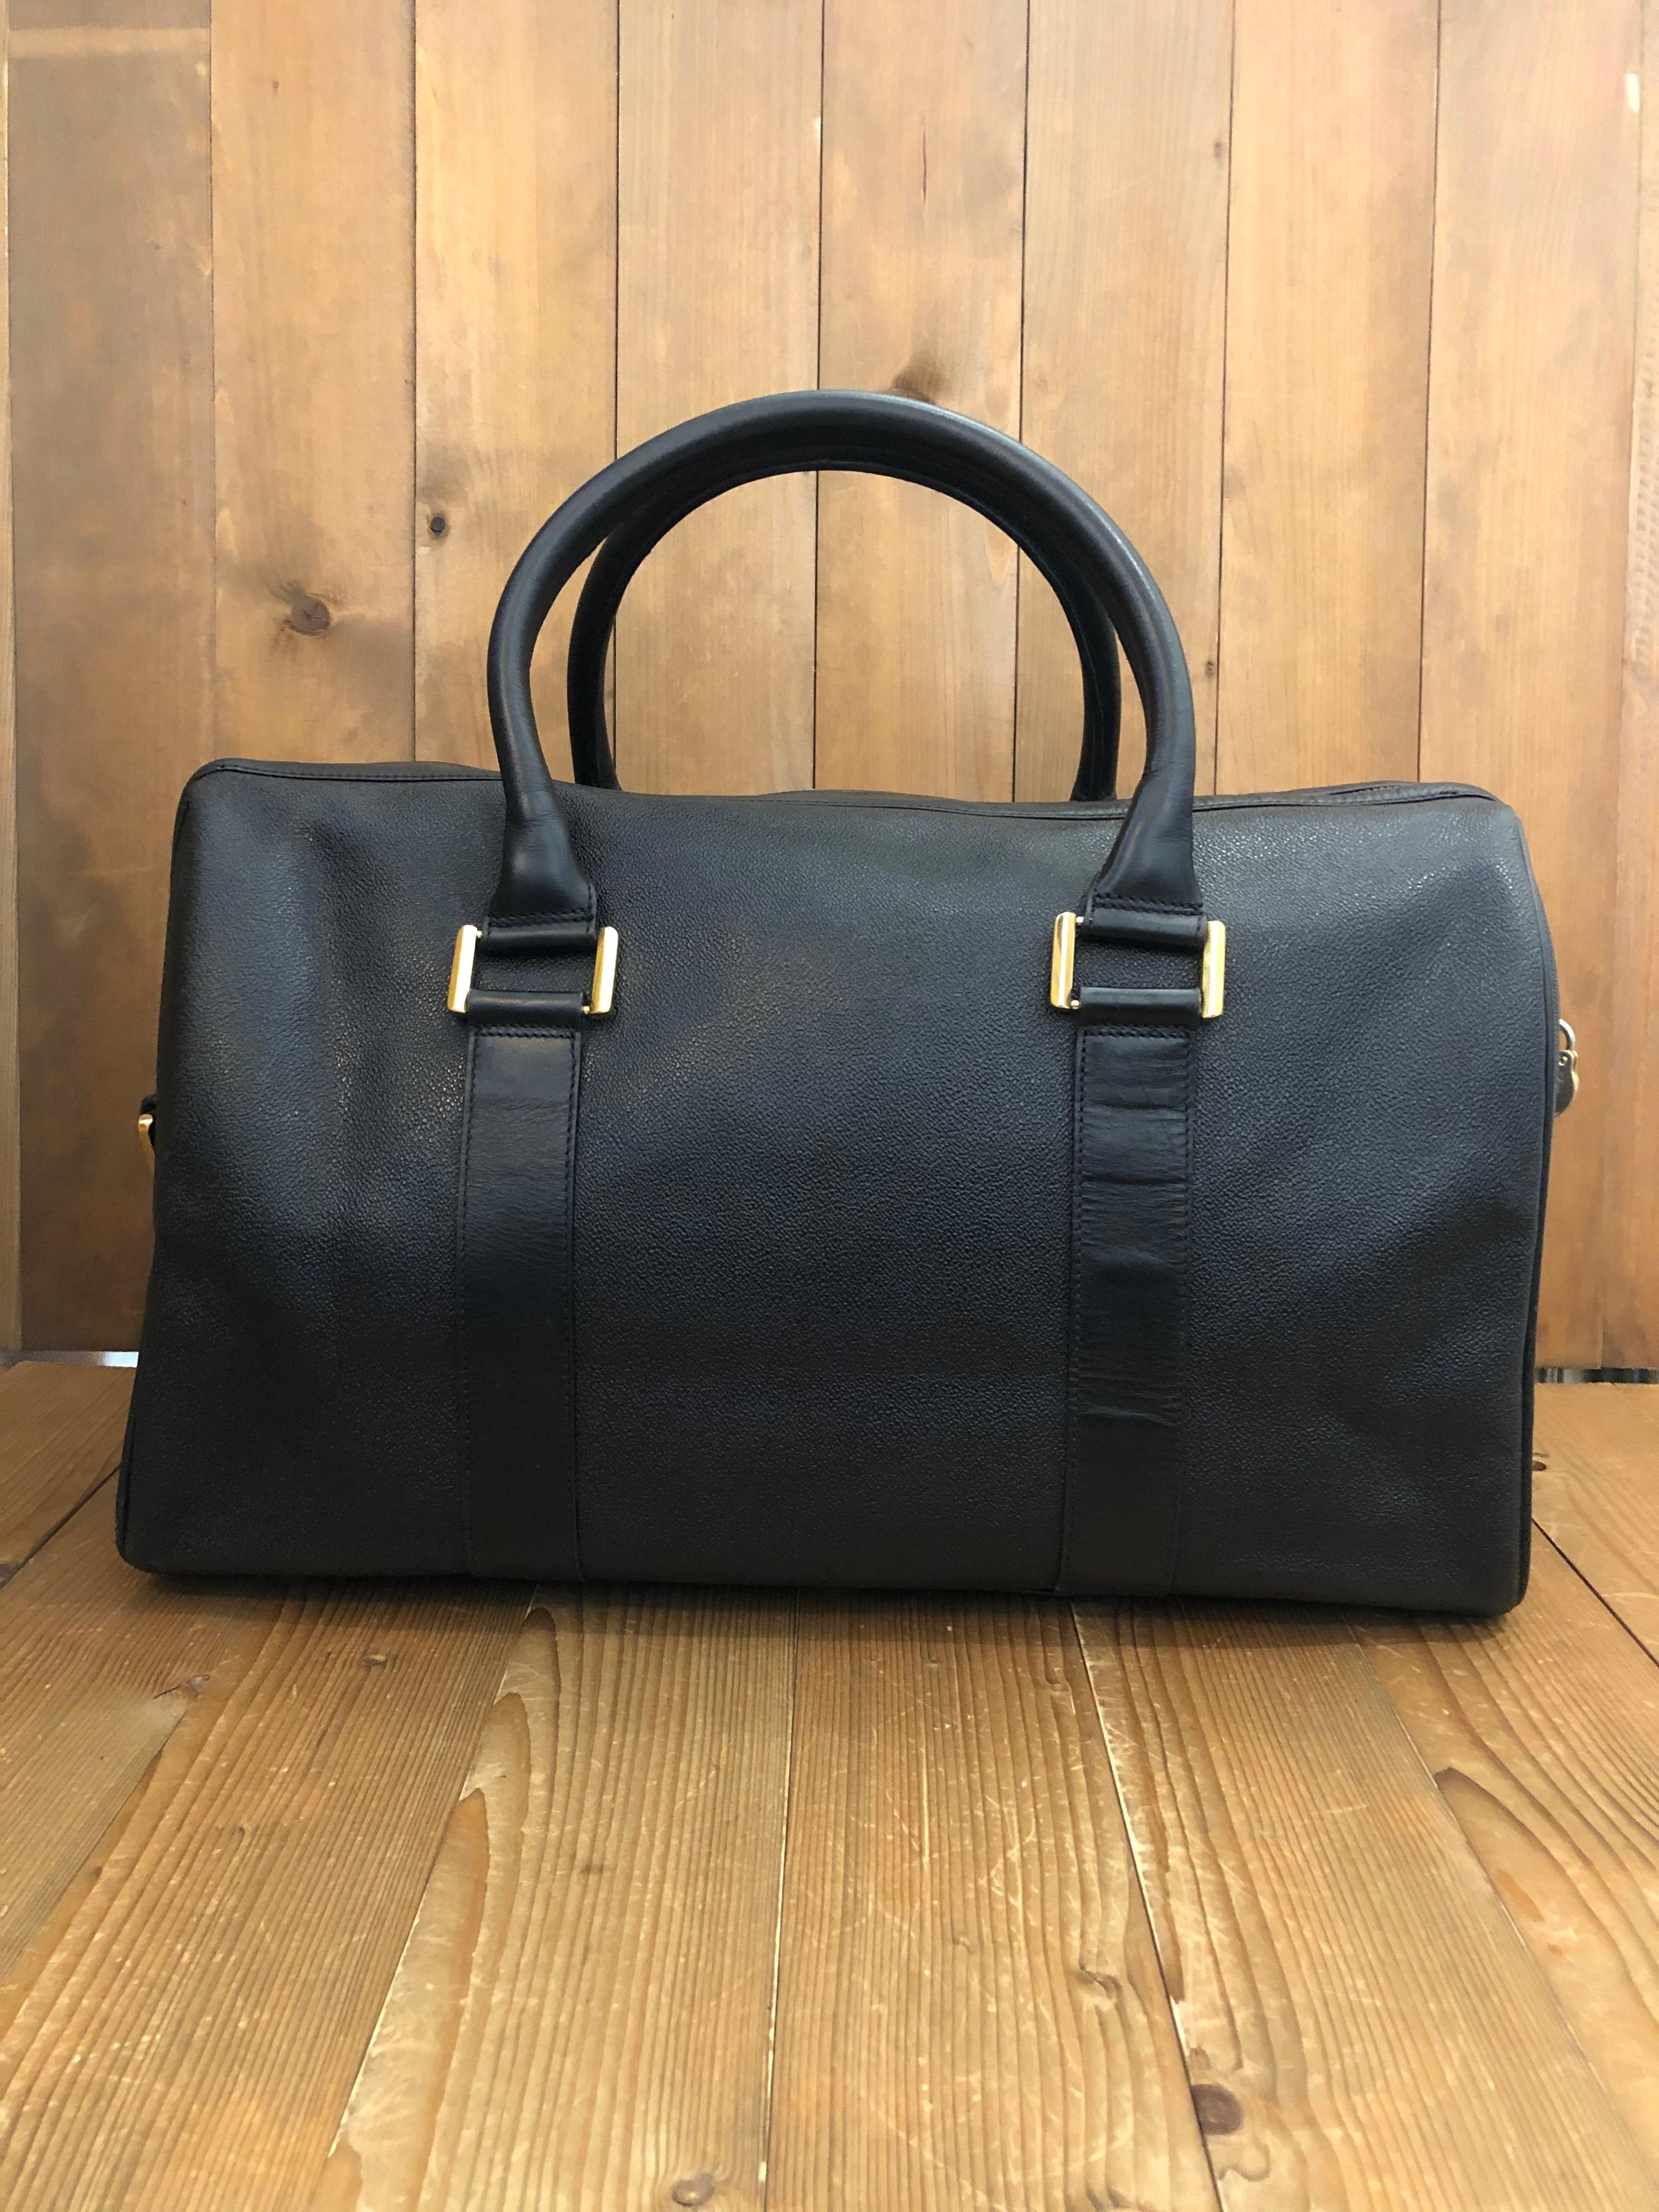 This vintage GIANNI VERSACE boston bag is crafted of textured leather in black featuring gold toned hardware. Top zipper closure opens to a black Gianni Versace jacquard interior featuring a zippered pocket. Cabin size. Perfect for a weekend